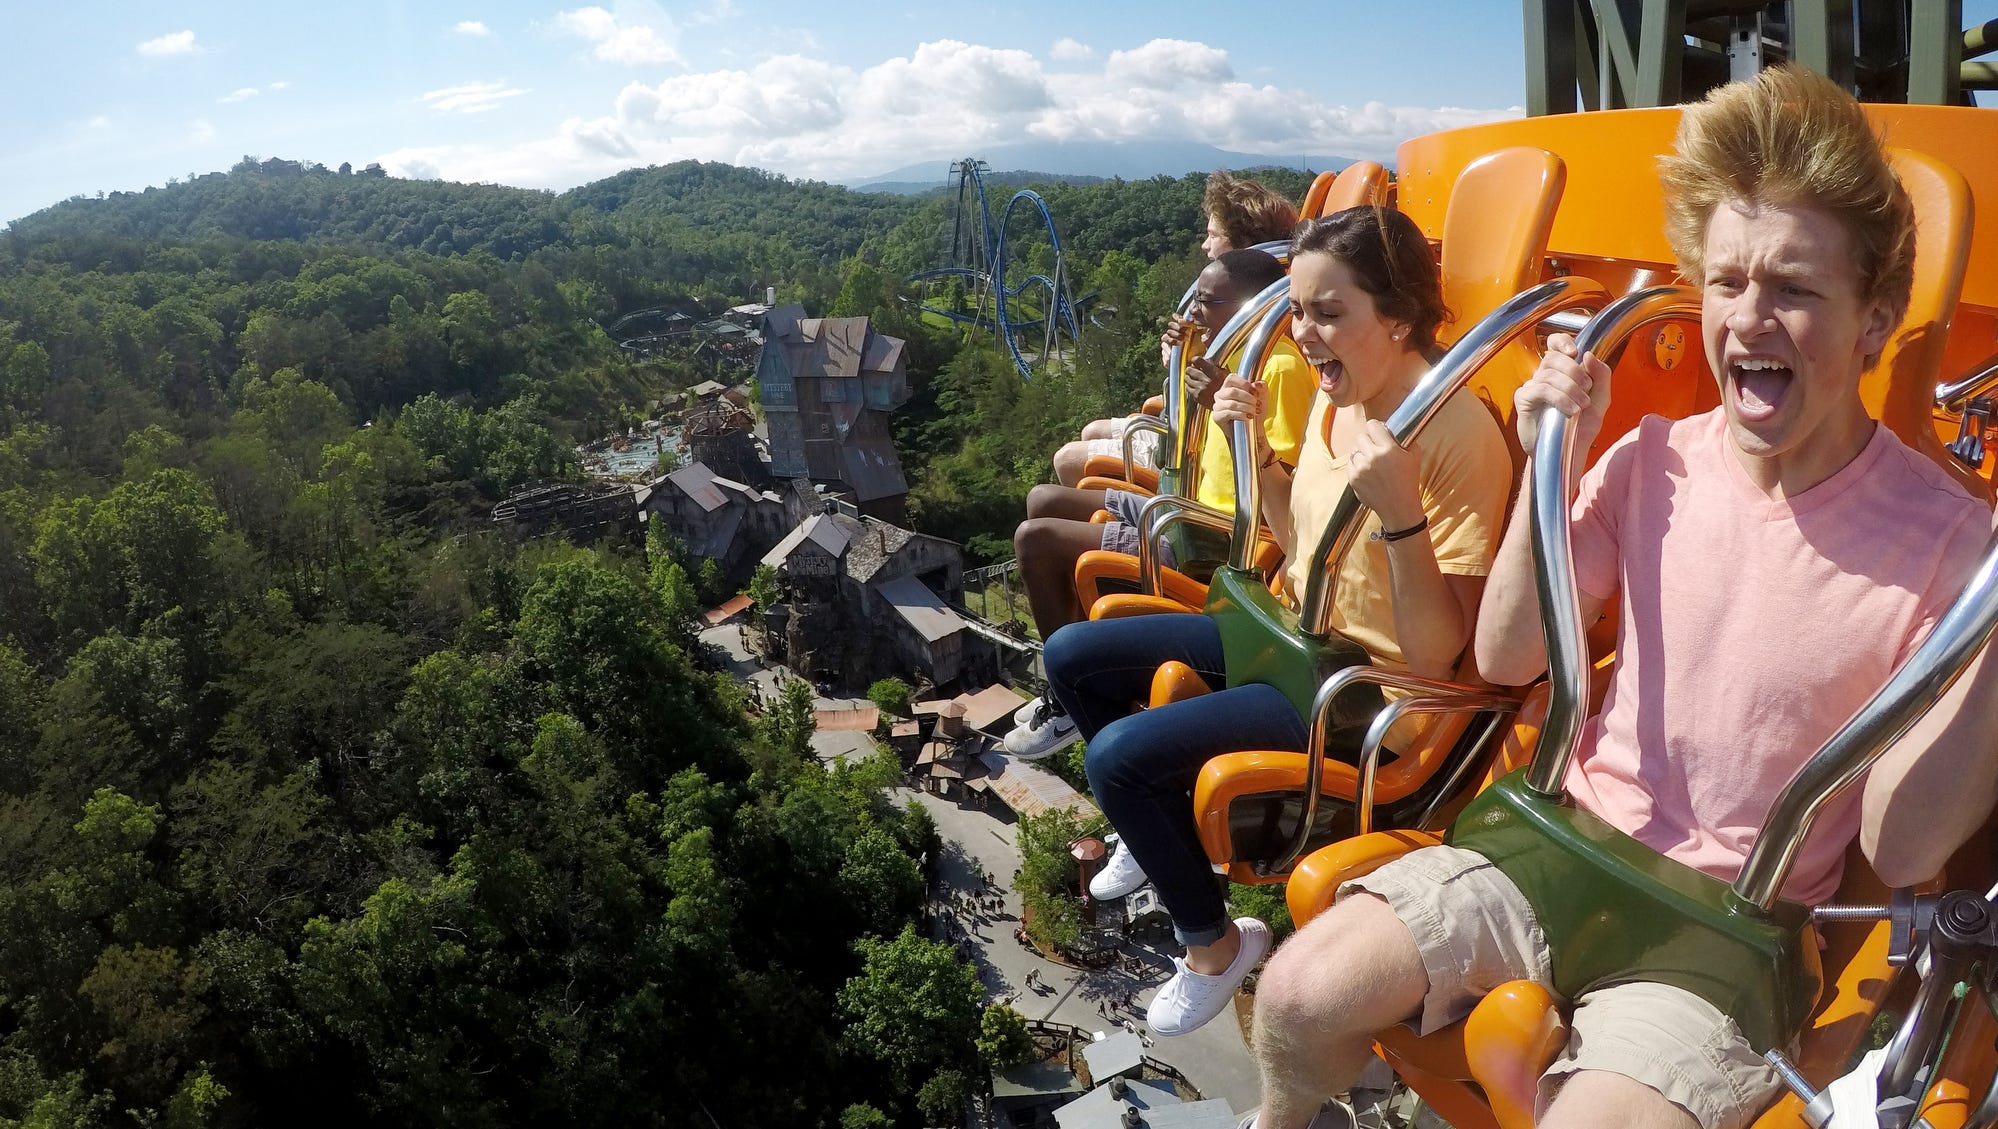 Deals at Dollywood, Six Flags, Kentucky Kingdom Holiday World and 4